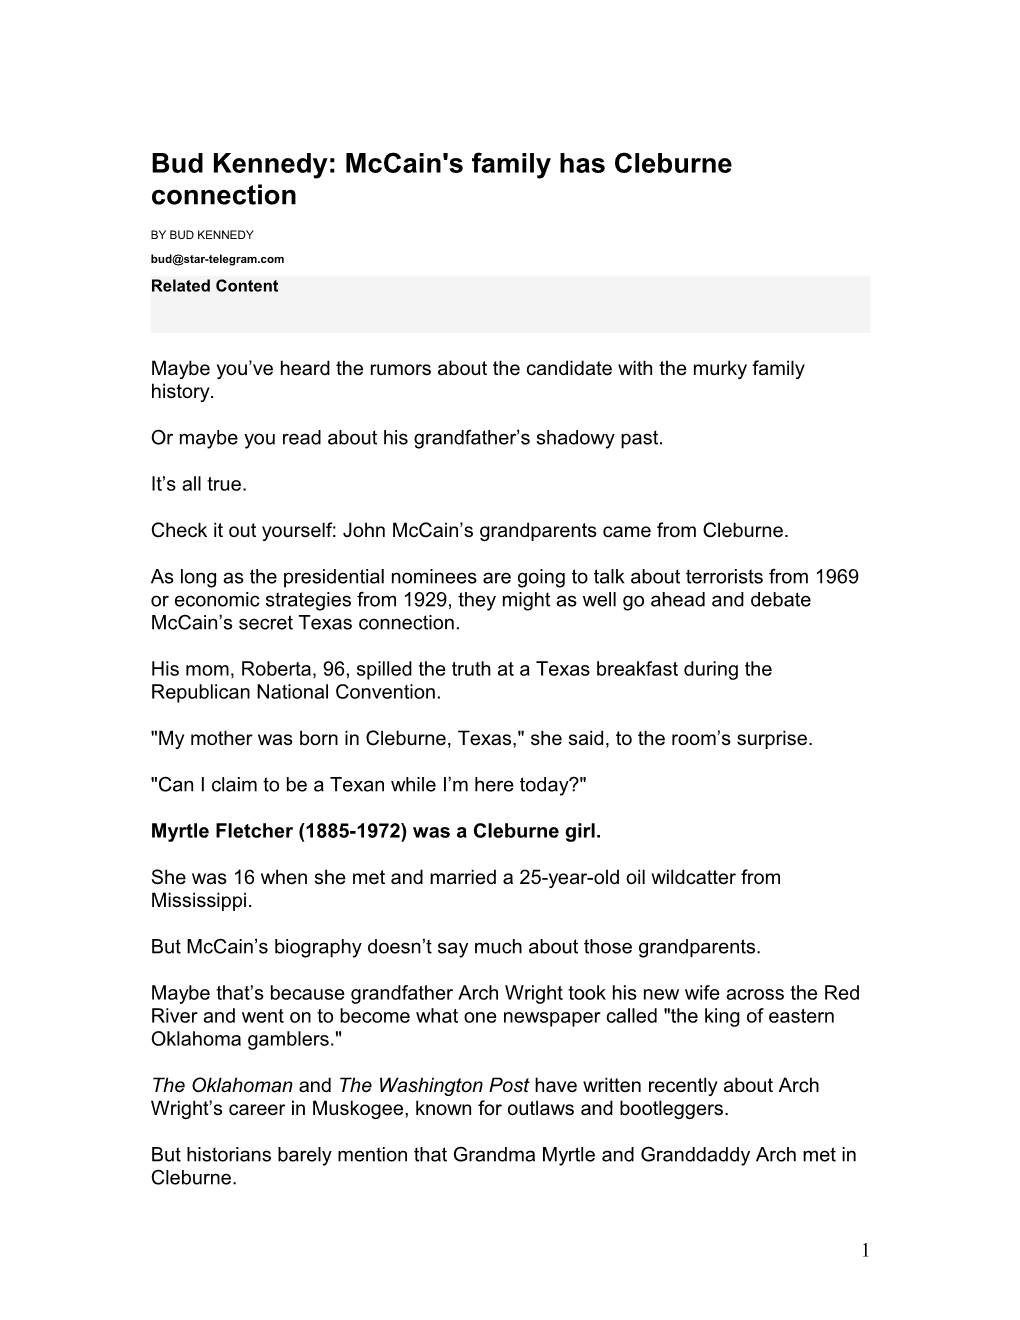 Bud Kennedy: Mccain's Family Has Cleburne Connection